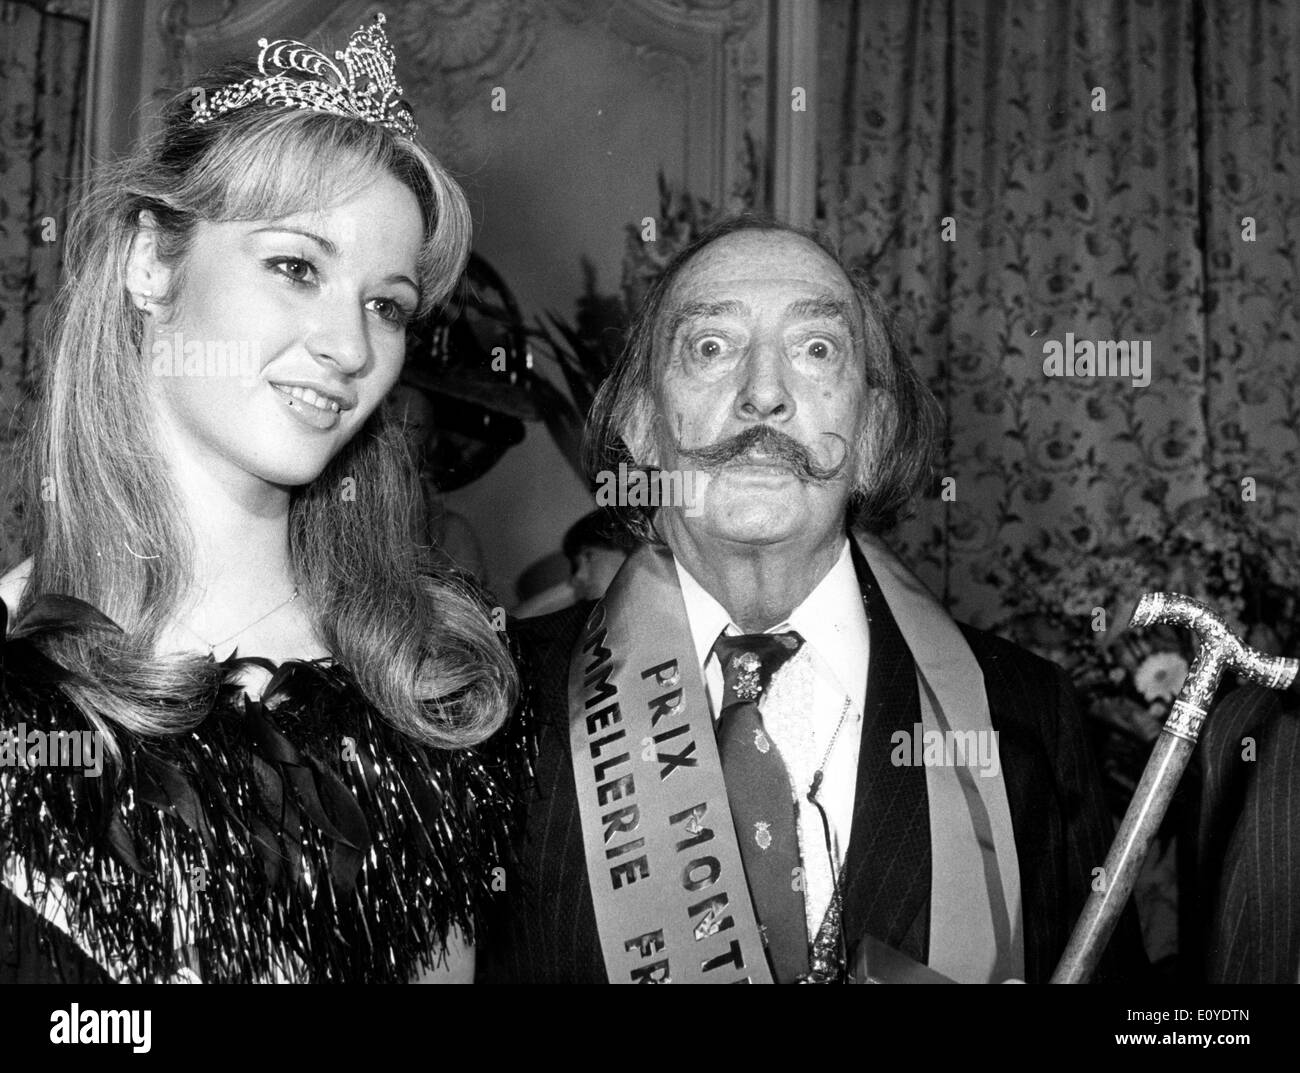 Artist Salvador Dali with young woman at event Stock Photo